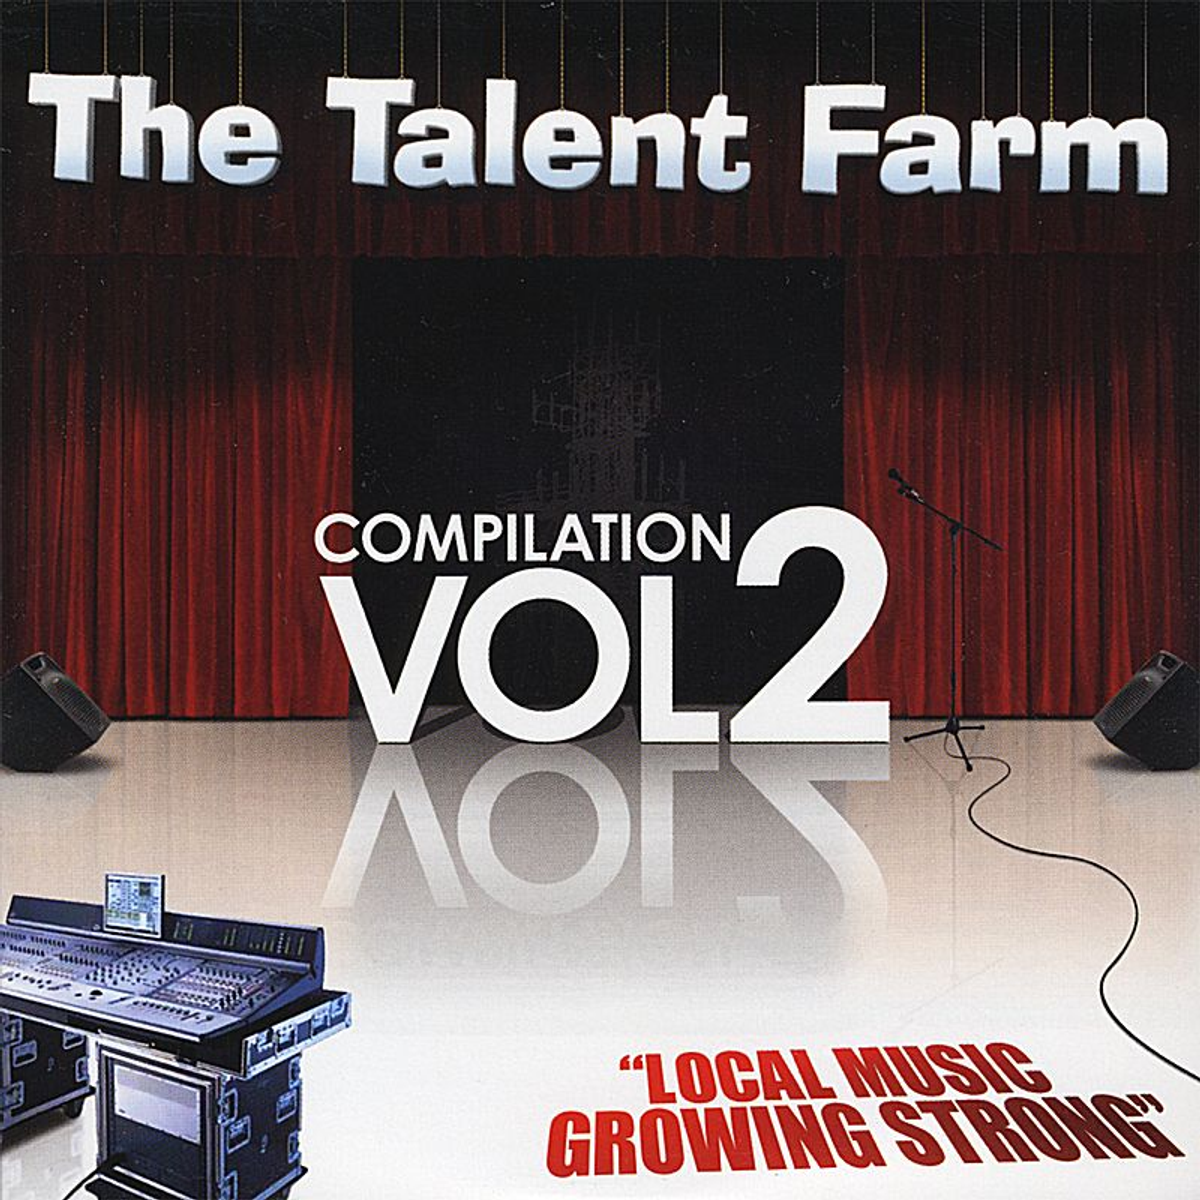 Tragic Affair by Pyrojet appears on The Talent Farm Compilation Vol 2